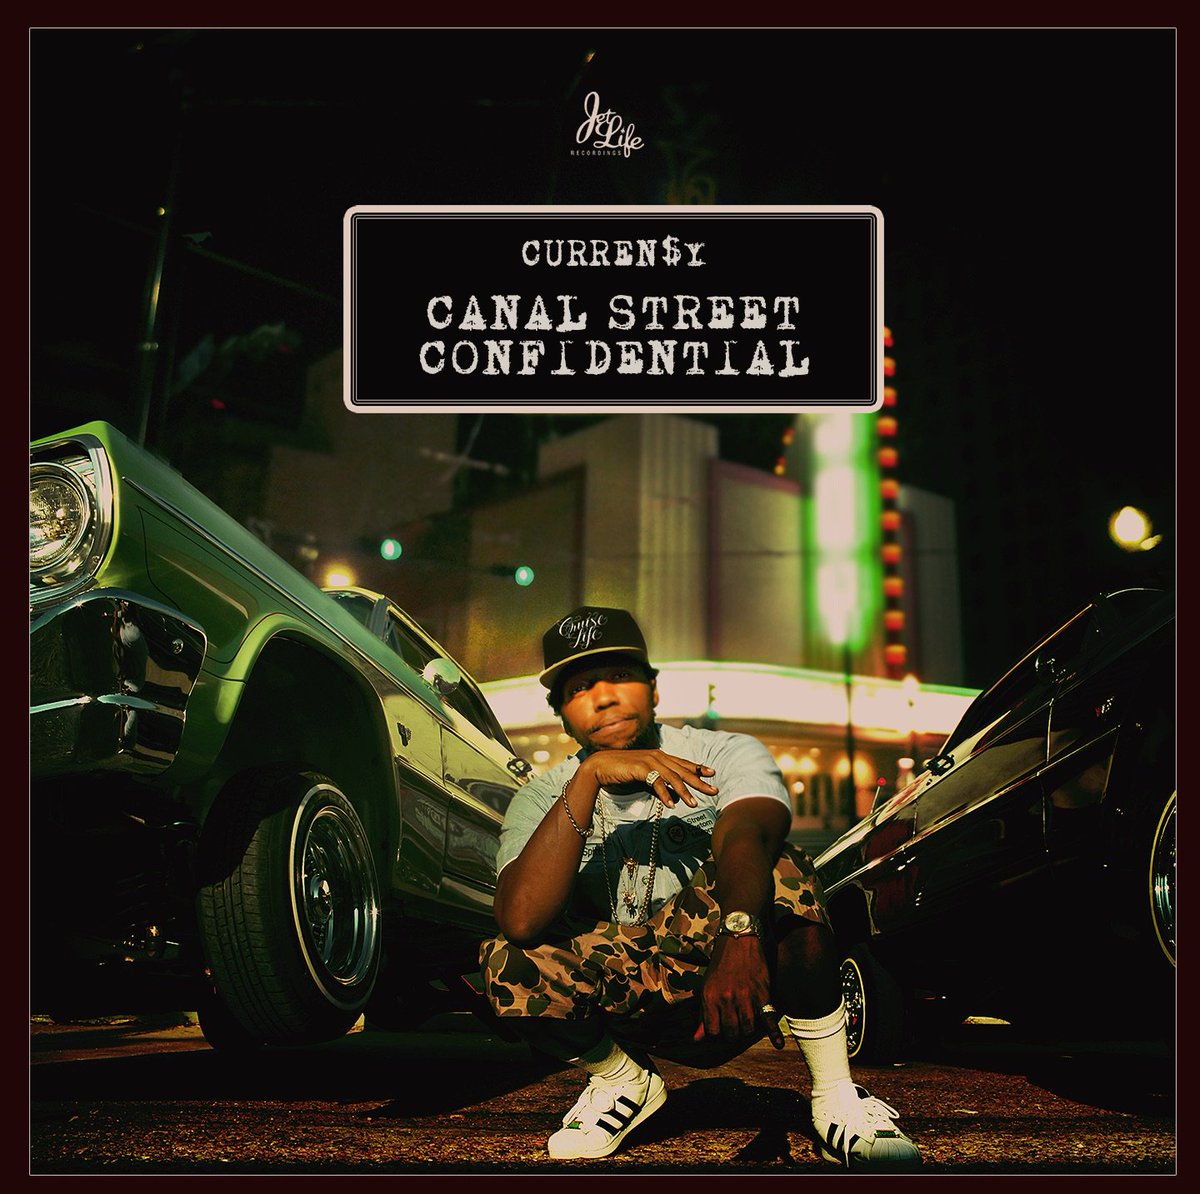 smoke 1 n get my nef @CurrenSy_Spitta new chit !!!    https://t.co/HhMDwS6M68   #canalstreetconfidential https://t.co/k5nqFkMgNV